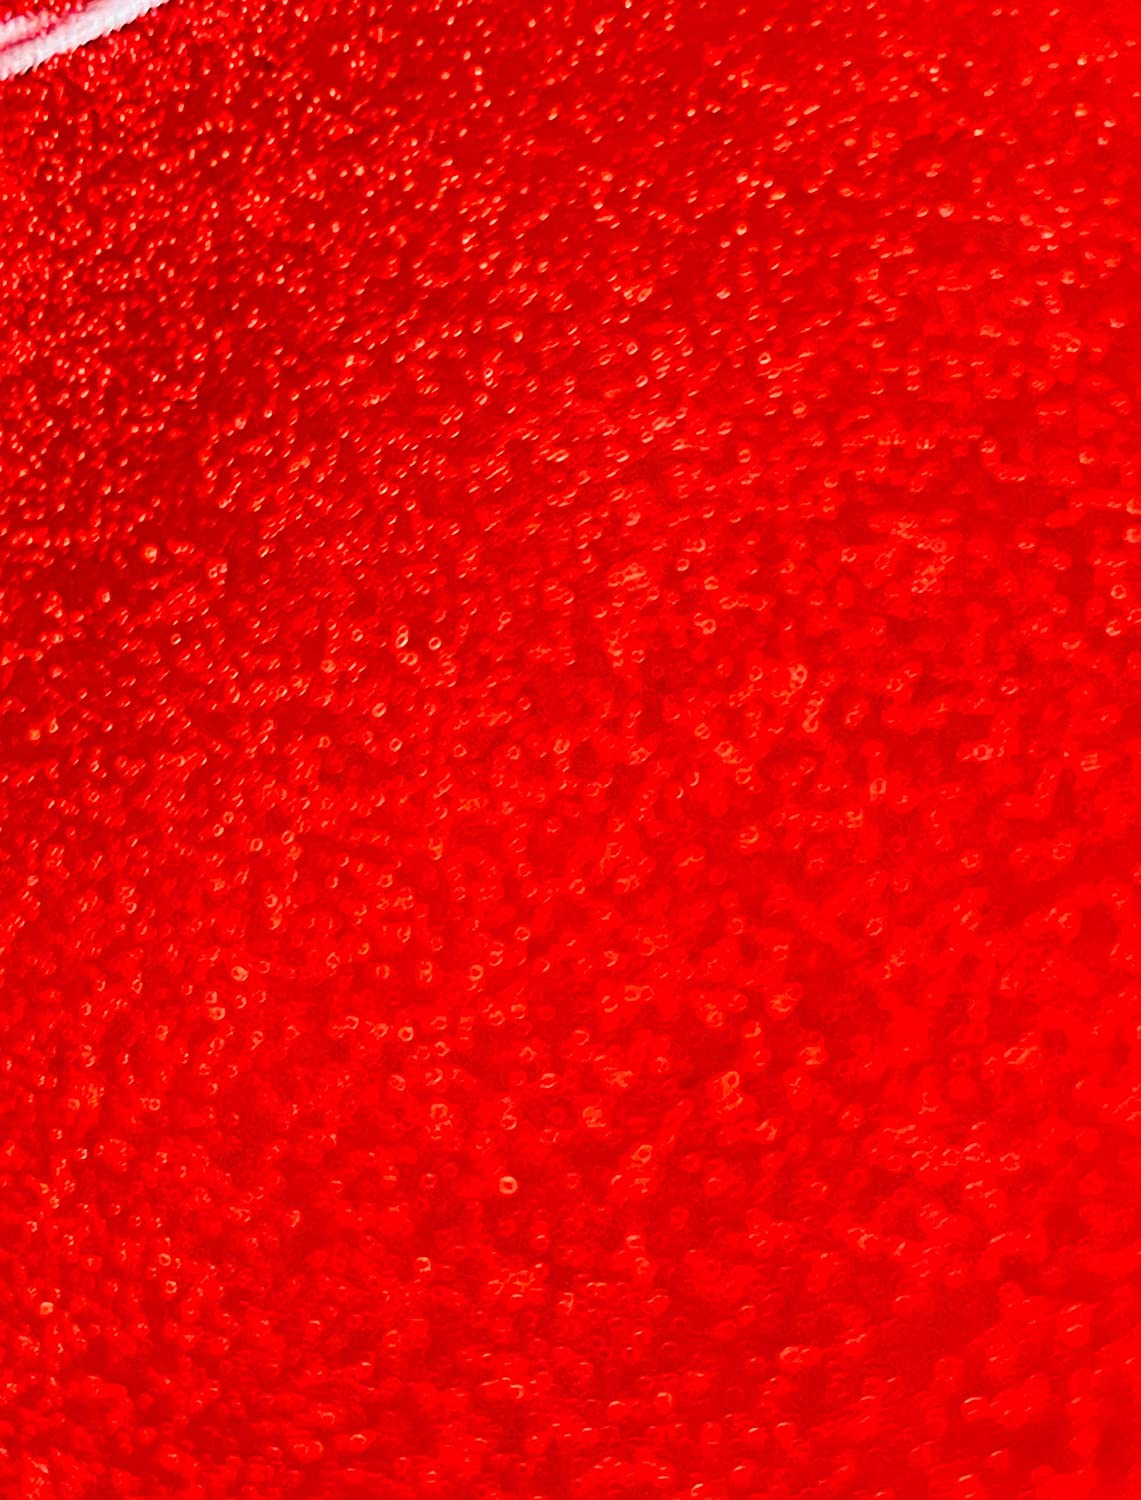 53/54" Wide Shiny Sparkle Glitter Vinyl, Faux Leather PVC-Upholstery Craft Fabric by The Yard (Red, 1 Yard)